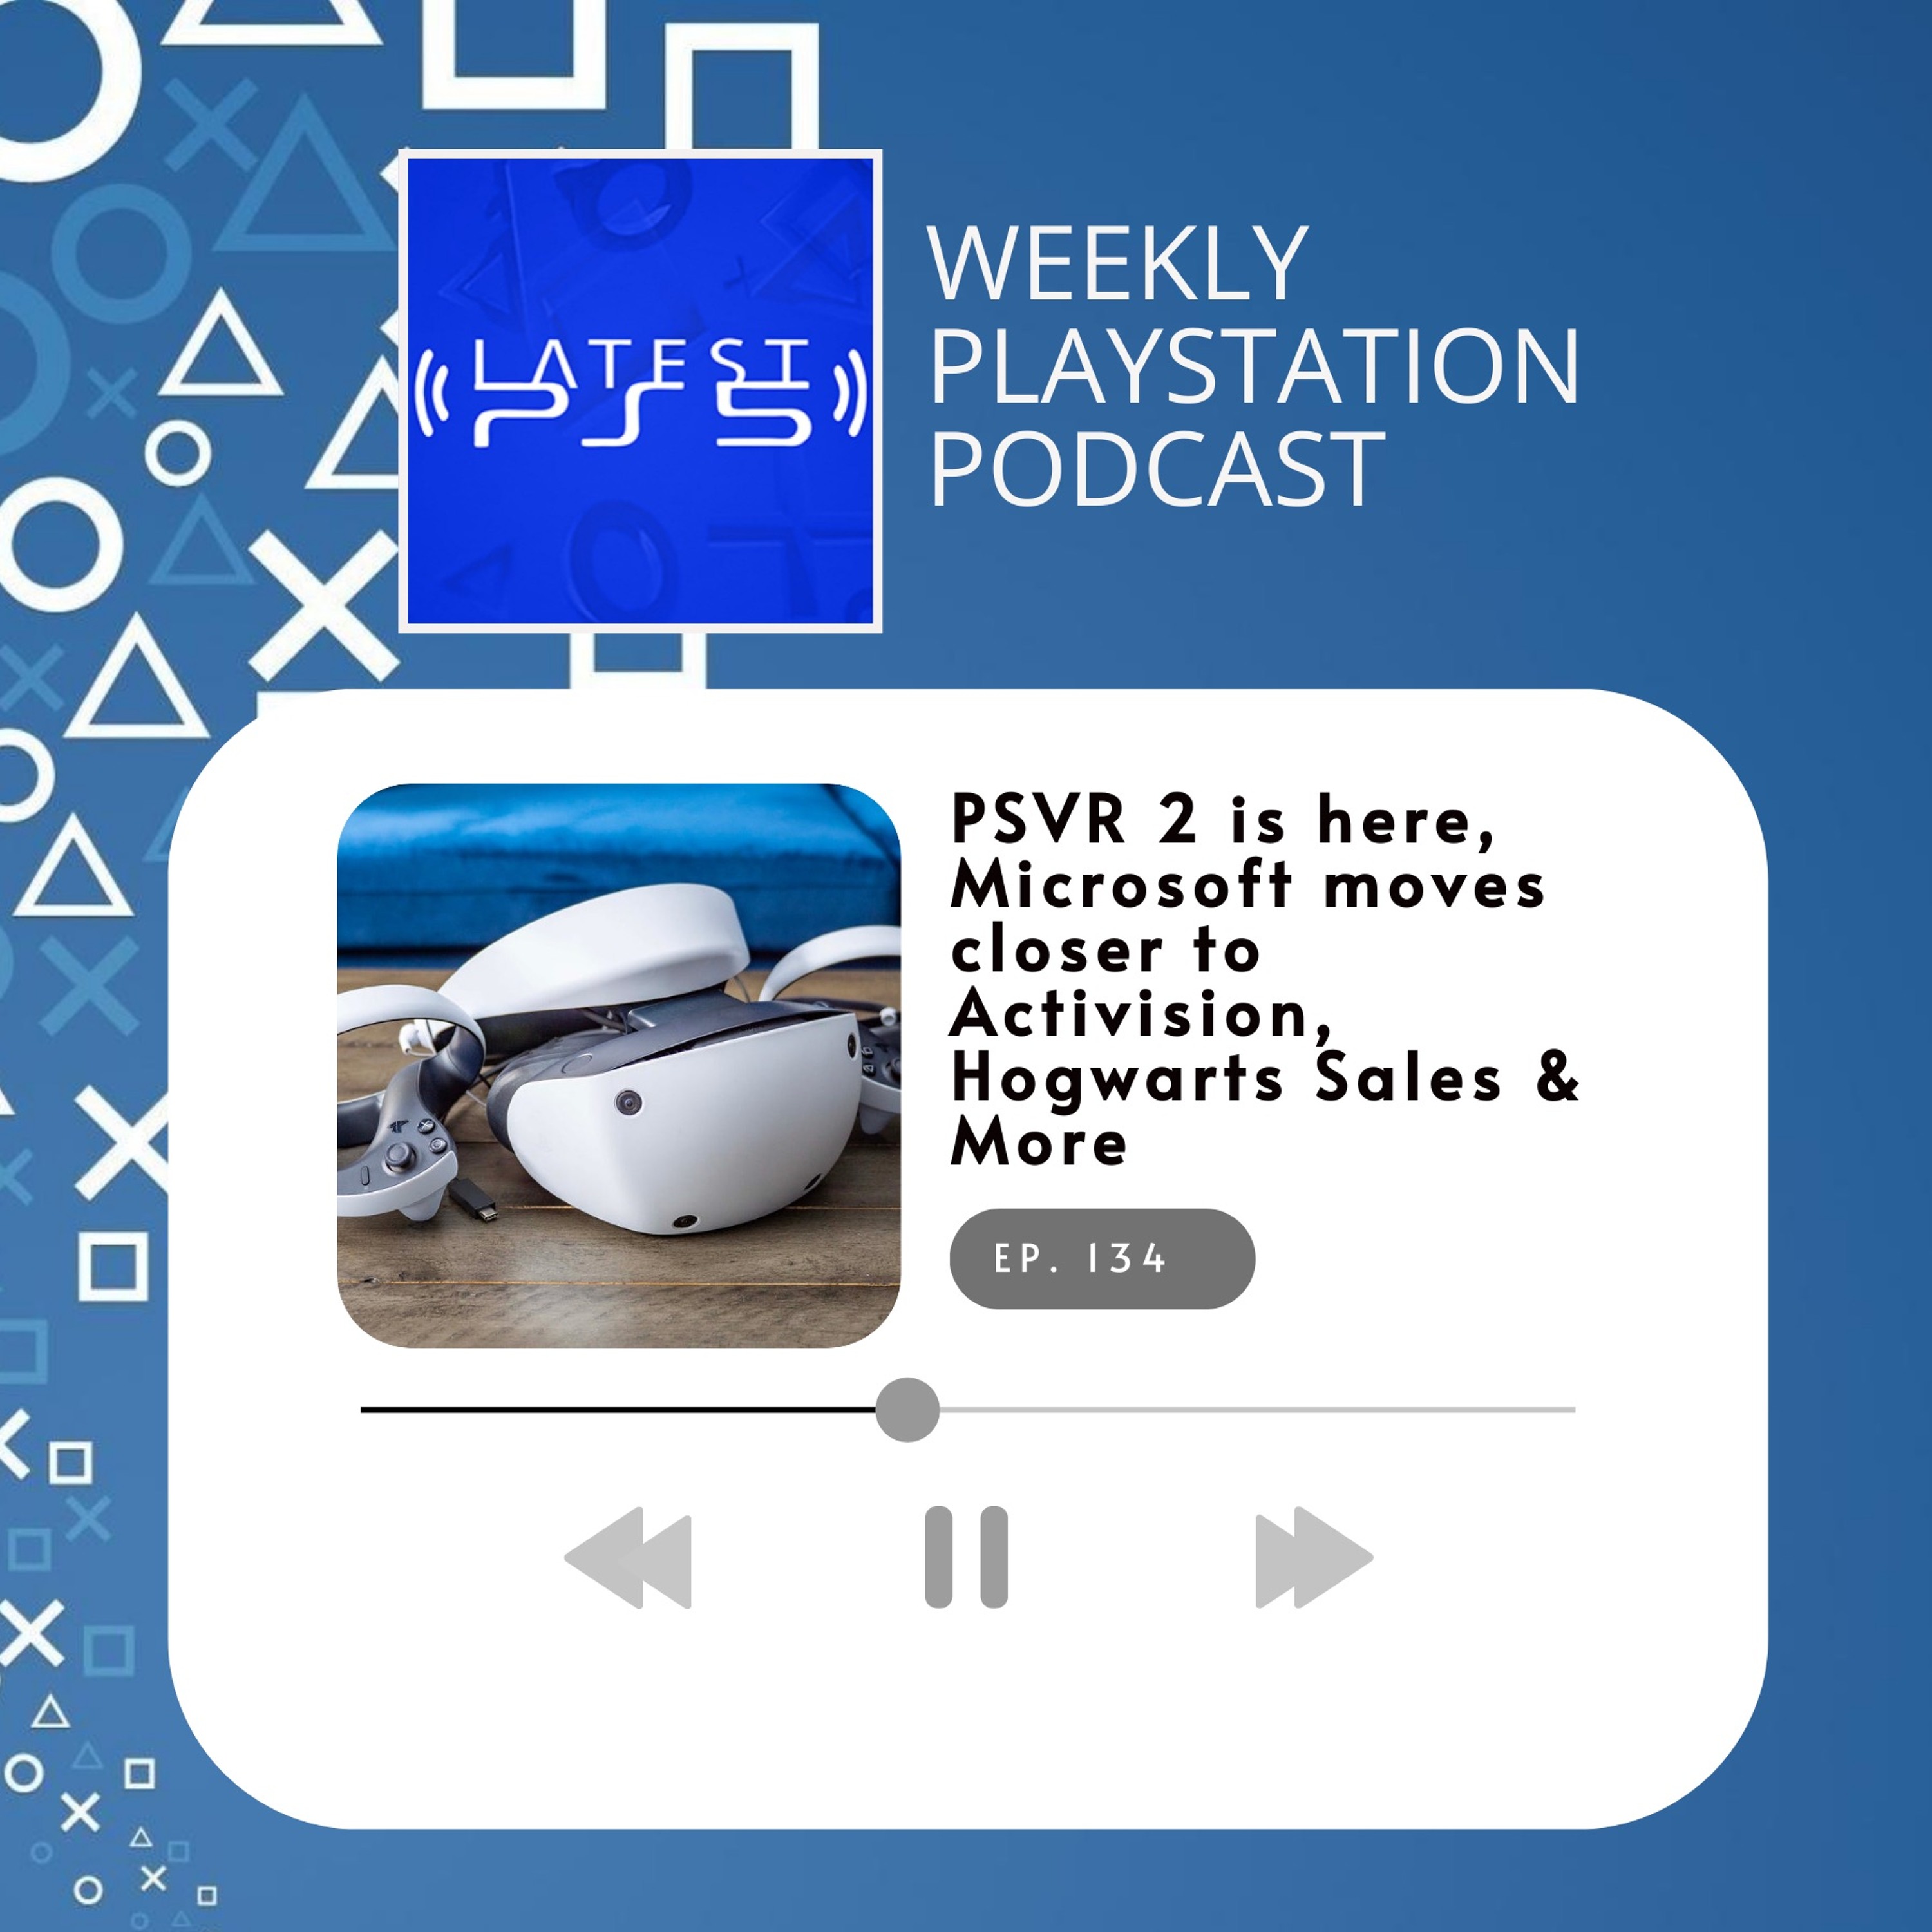 PSVR 2 is here, Microsoft has its say, Hogwarts Sales Numbers & More